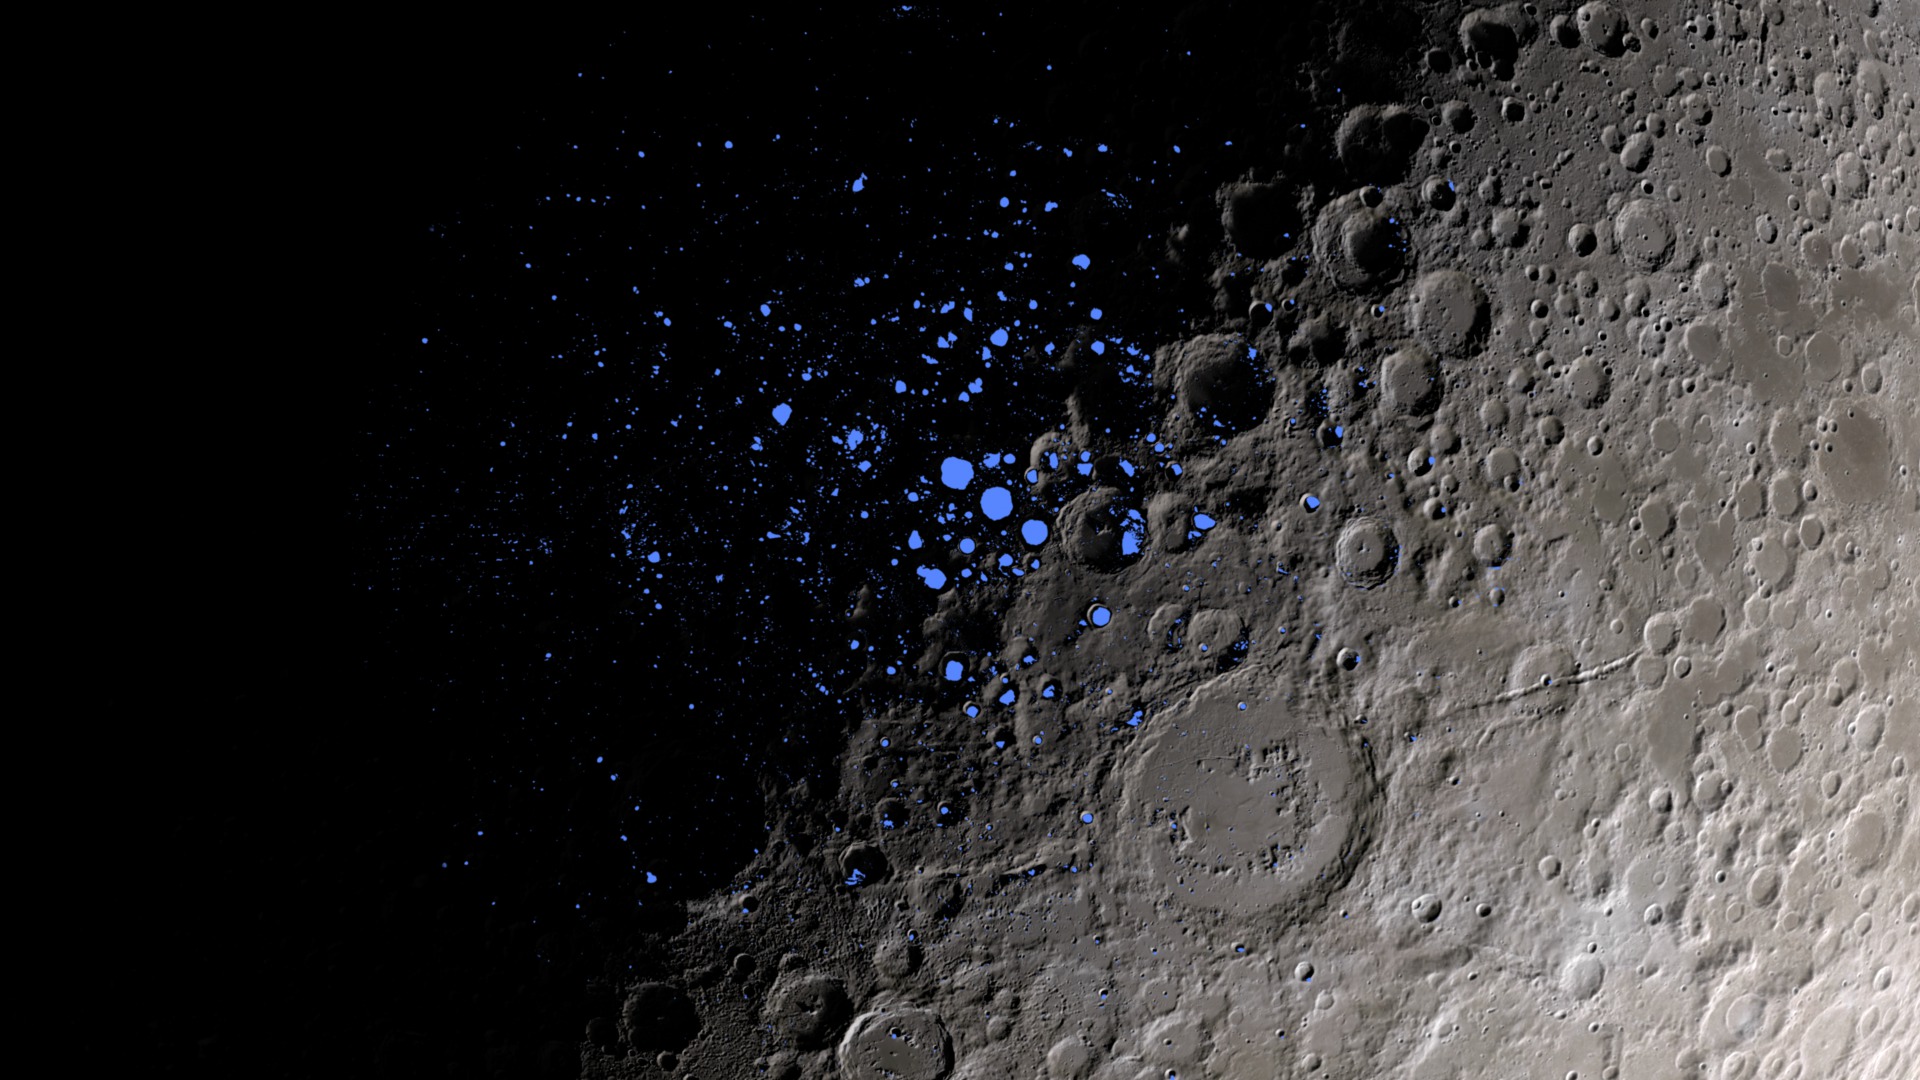 Beginning with a full-frame Moon, the camera flies to the lunar south pole and shows areas of permanent shadow. Realistic shadows evolve through several months.